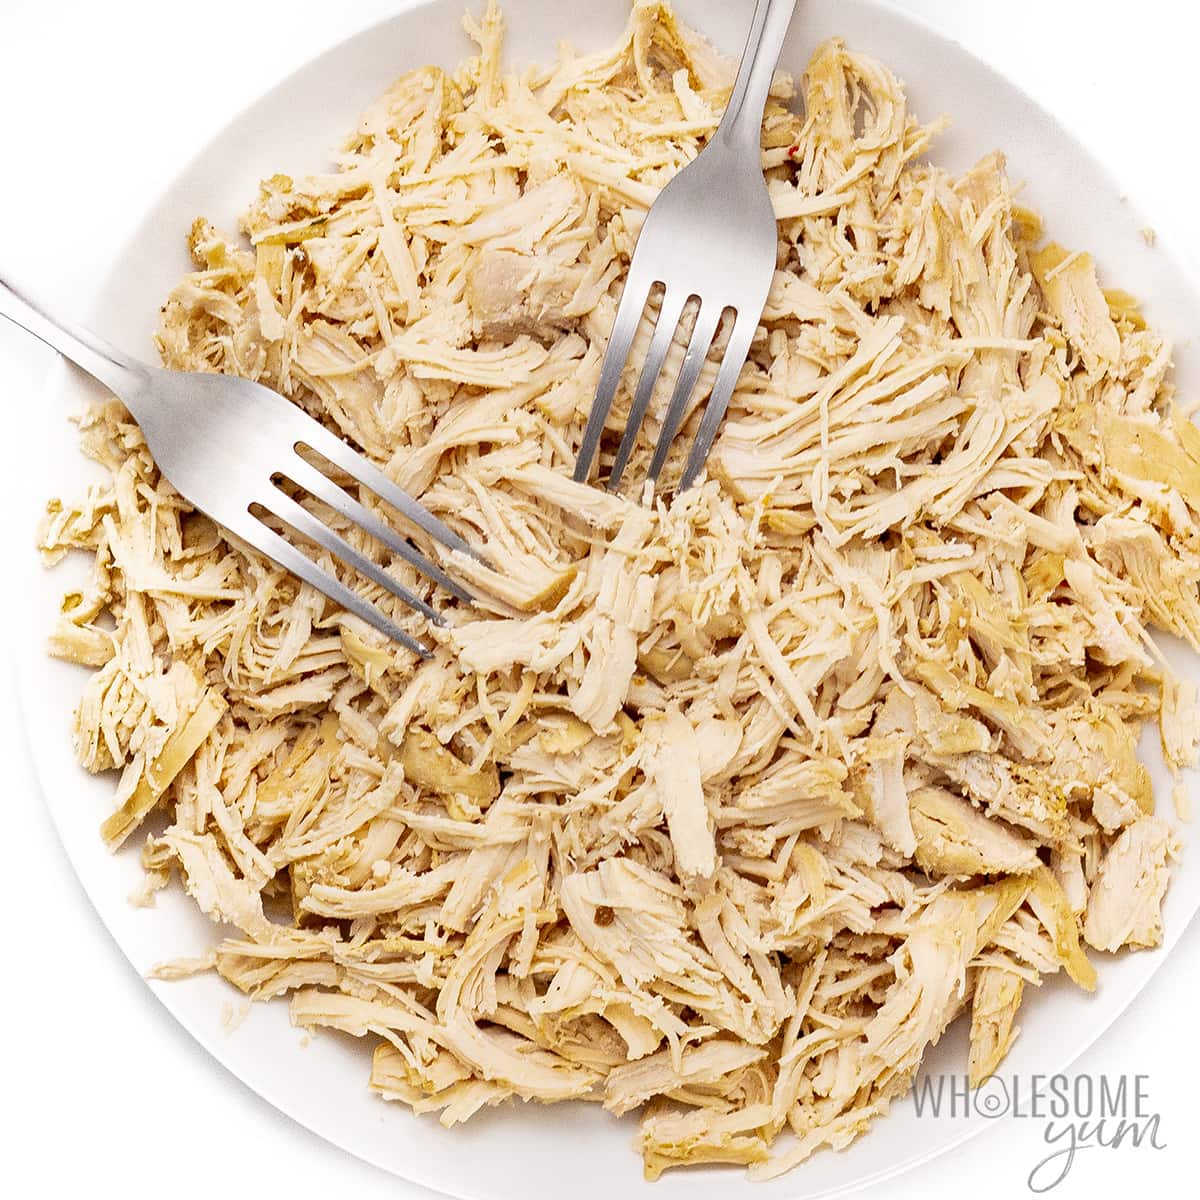 Chicken shredded on a plate.